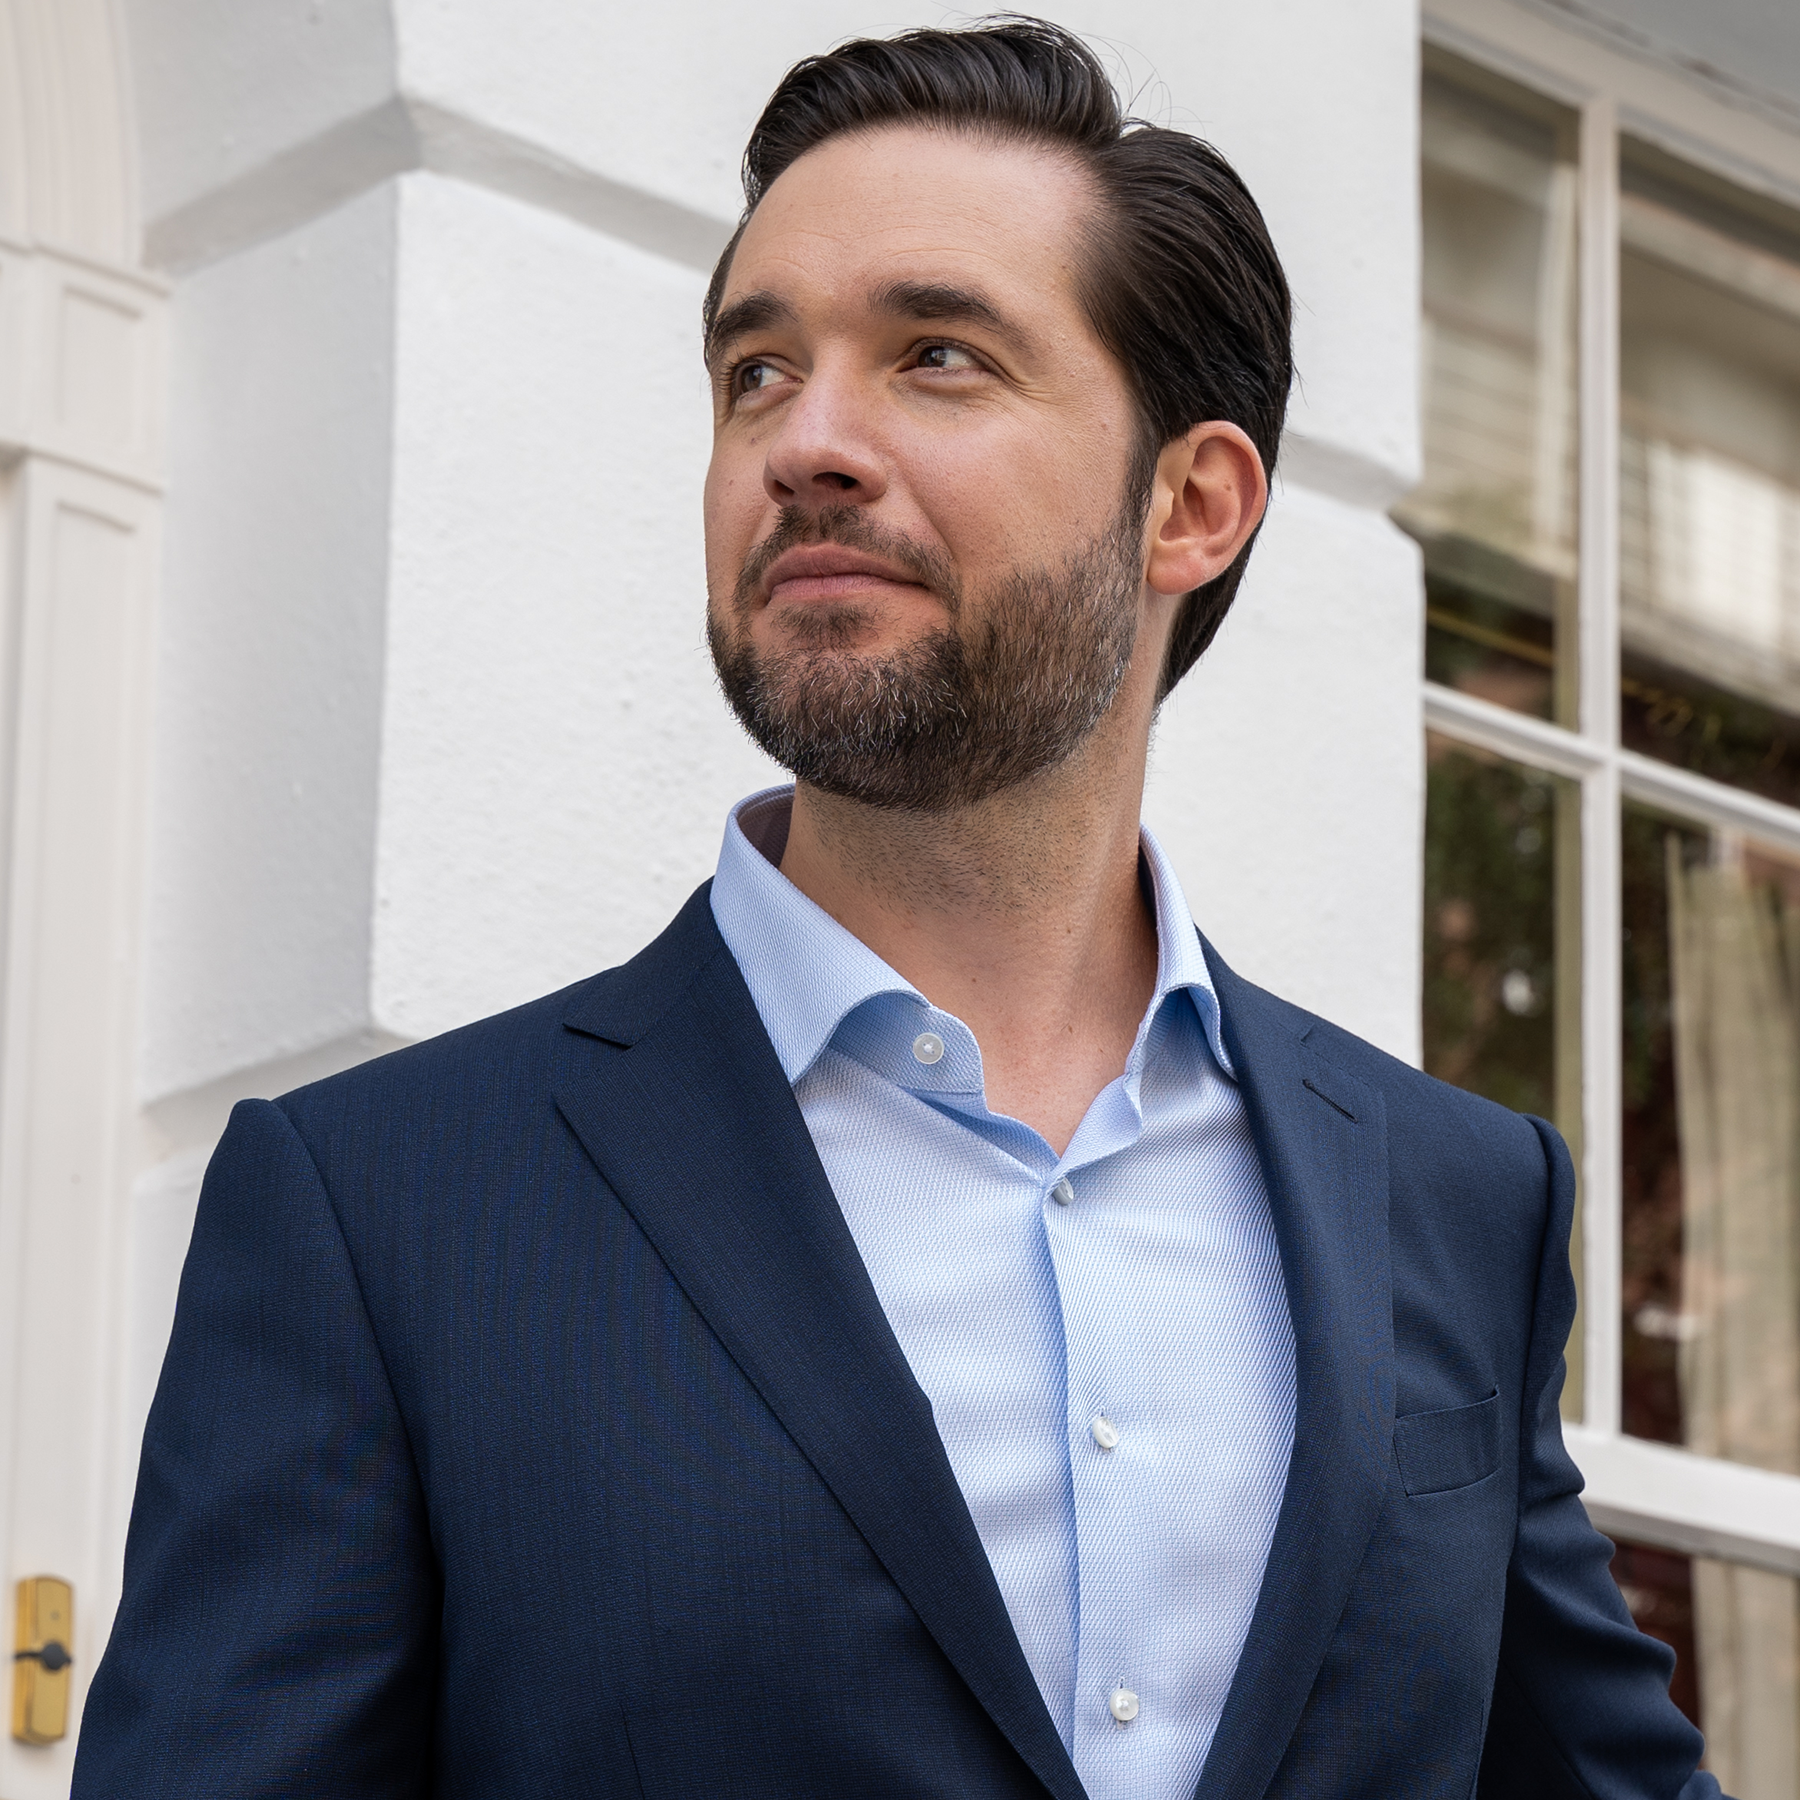 Reddit Co-Founder Alexis Ohanian Talks Growing Up Online And The Future Of The Internet